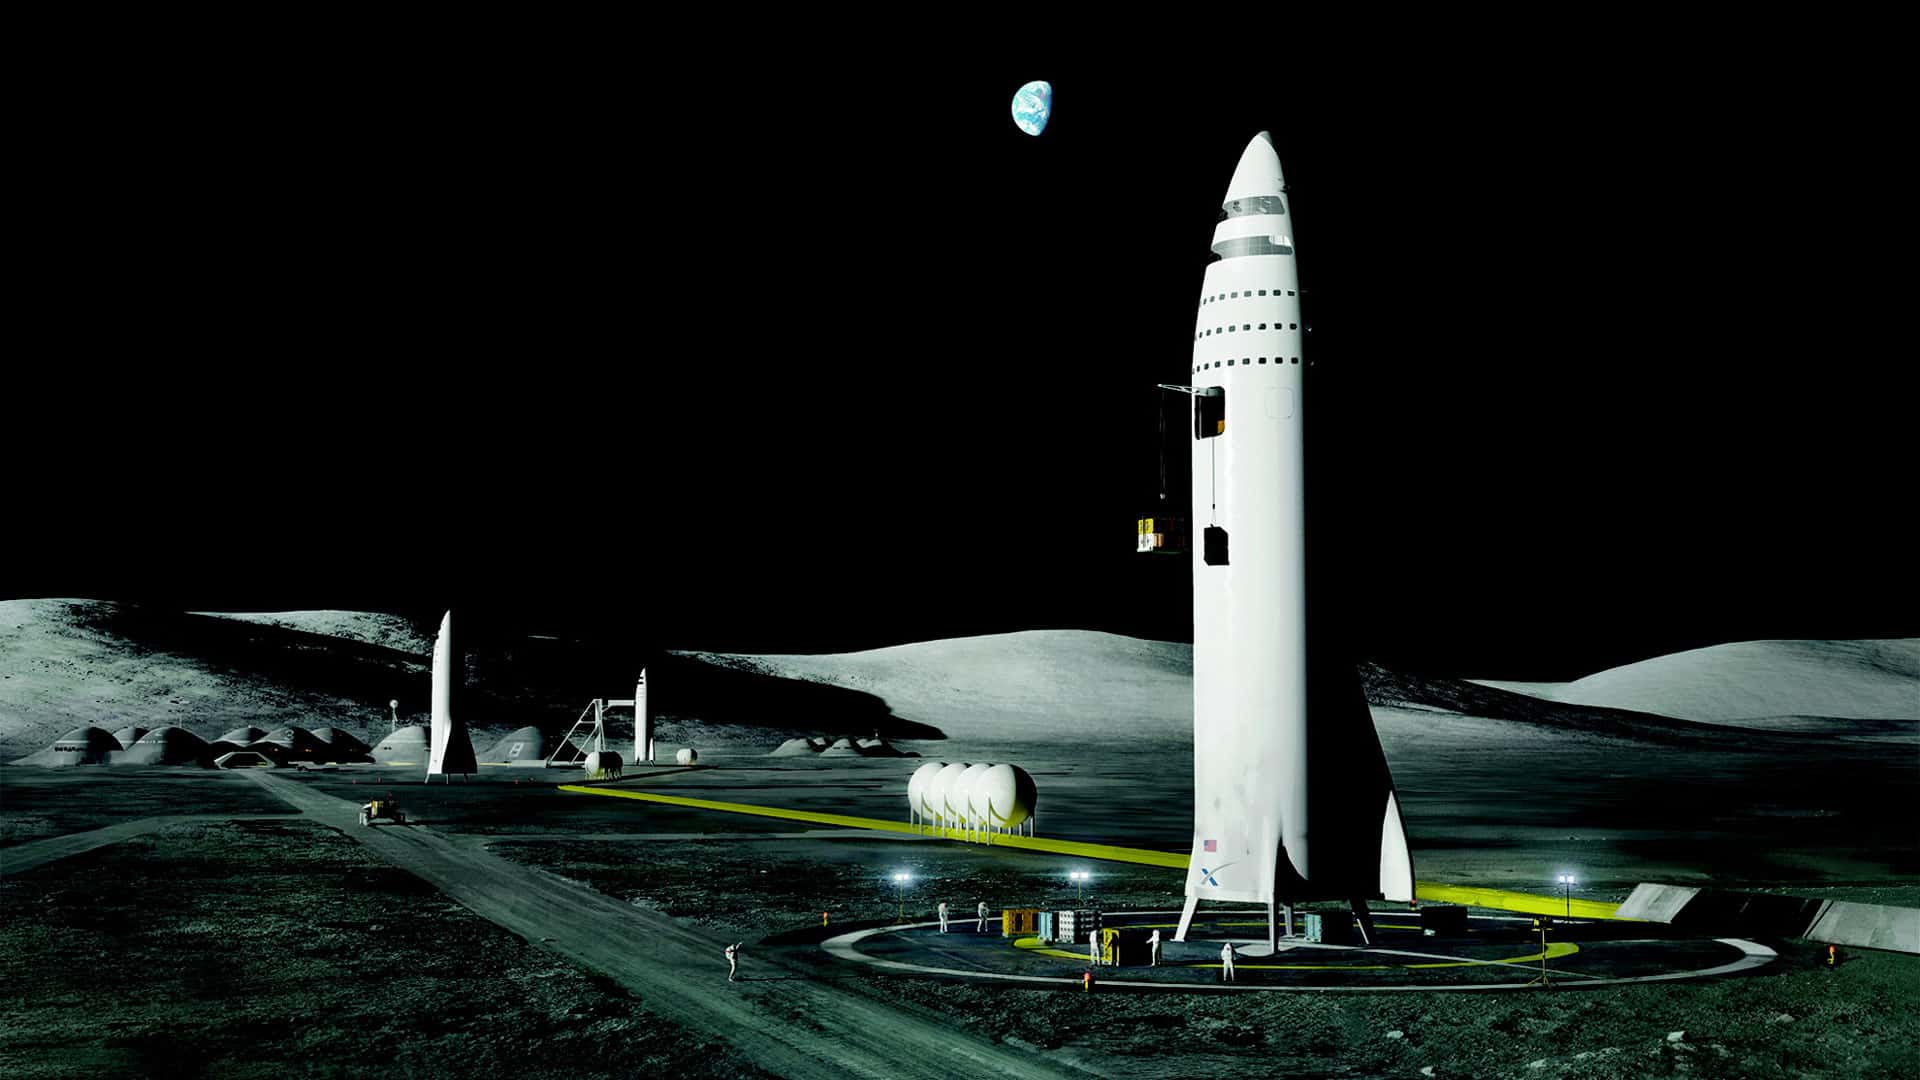 <p>SpaceX’s newest endeavor, the BFR or “Big Falcon Rocket,” is set to run tests launches in 2019. Its design would ultimately replace the Falcon 9, Falcon Heavy, AND the Dragon rocket to fly into low-earth orbit. Eventually, it could sustain a whole trip to Mars.</p>